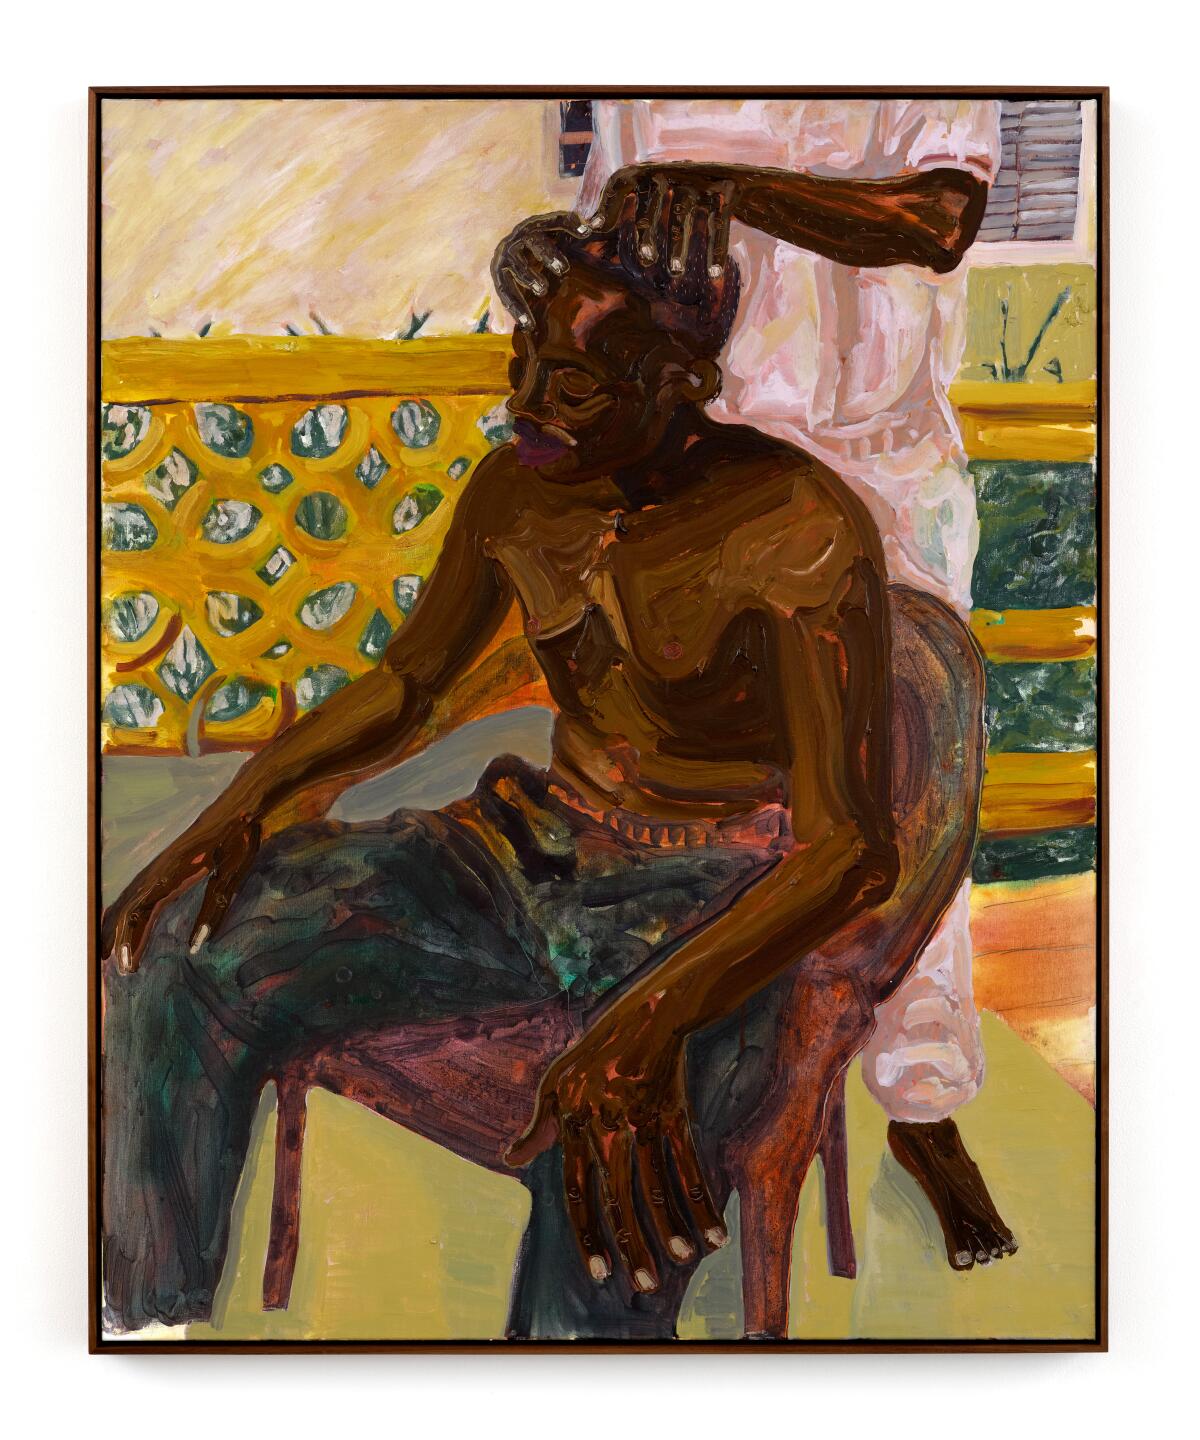 A painting of a man sitting in a chair with a woman's hands on his head.